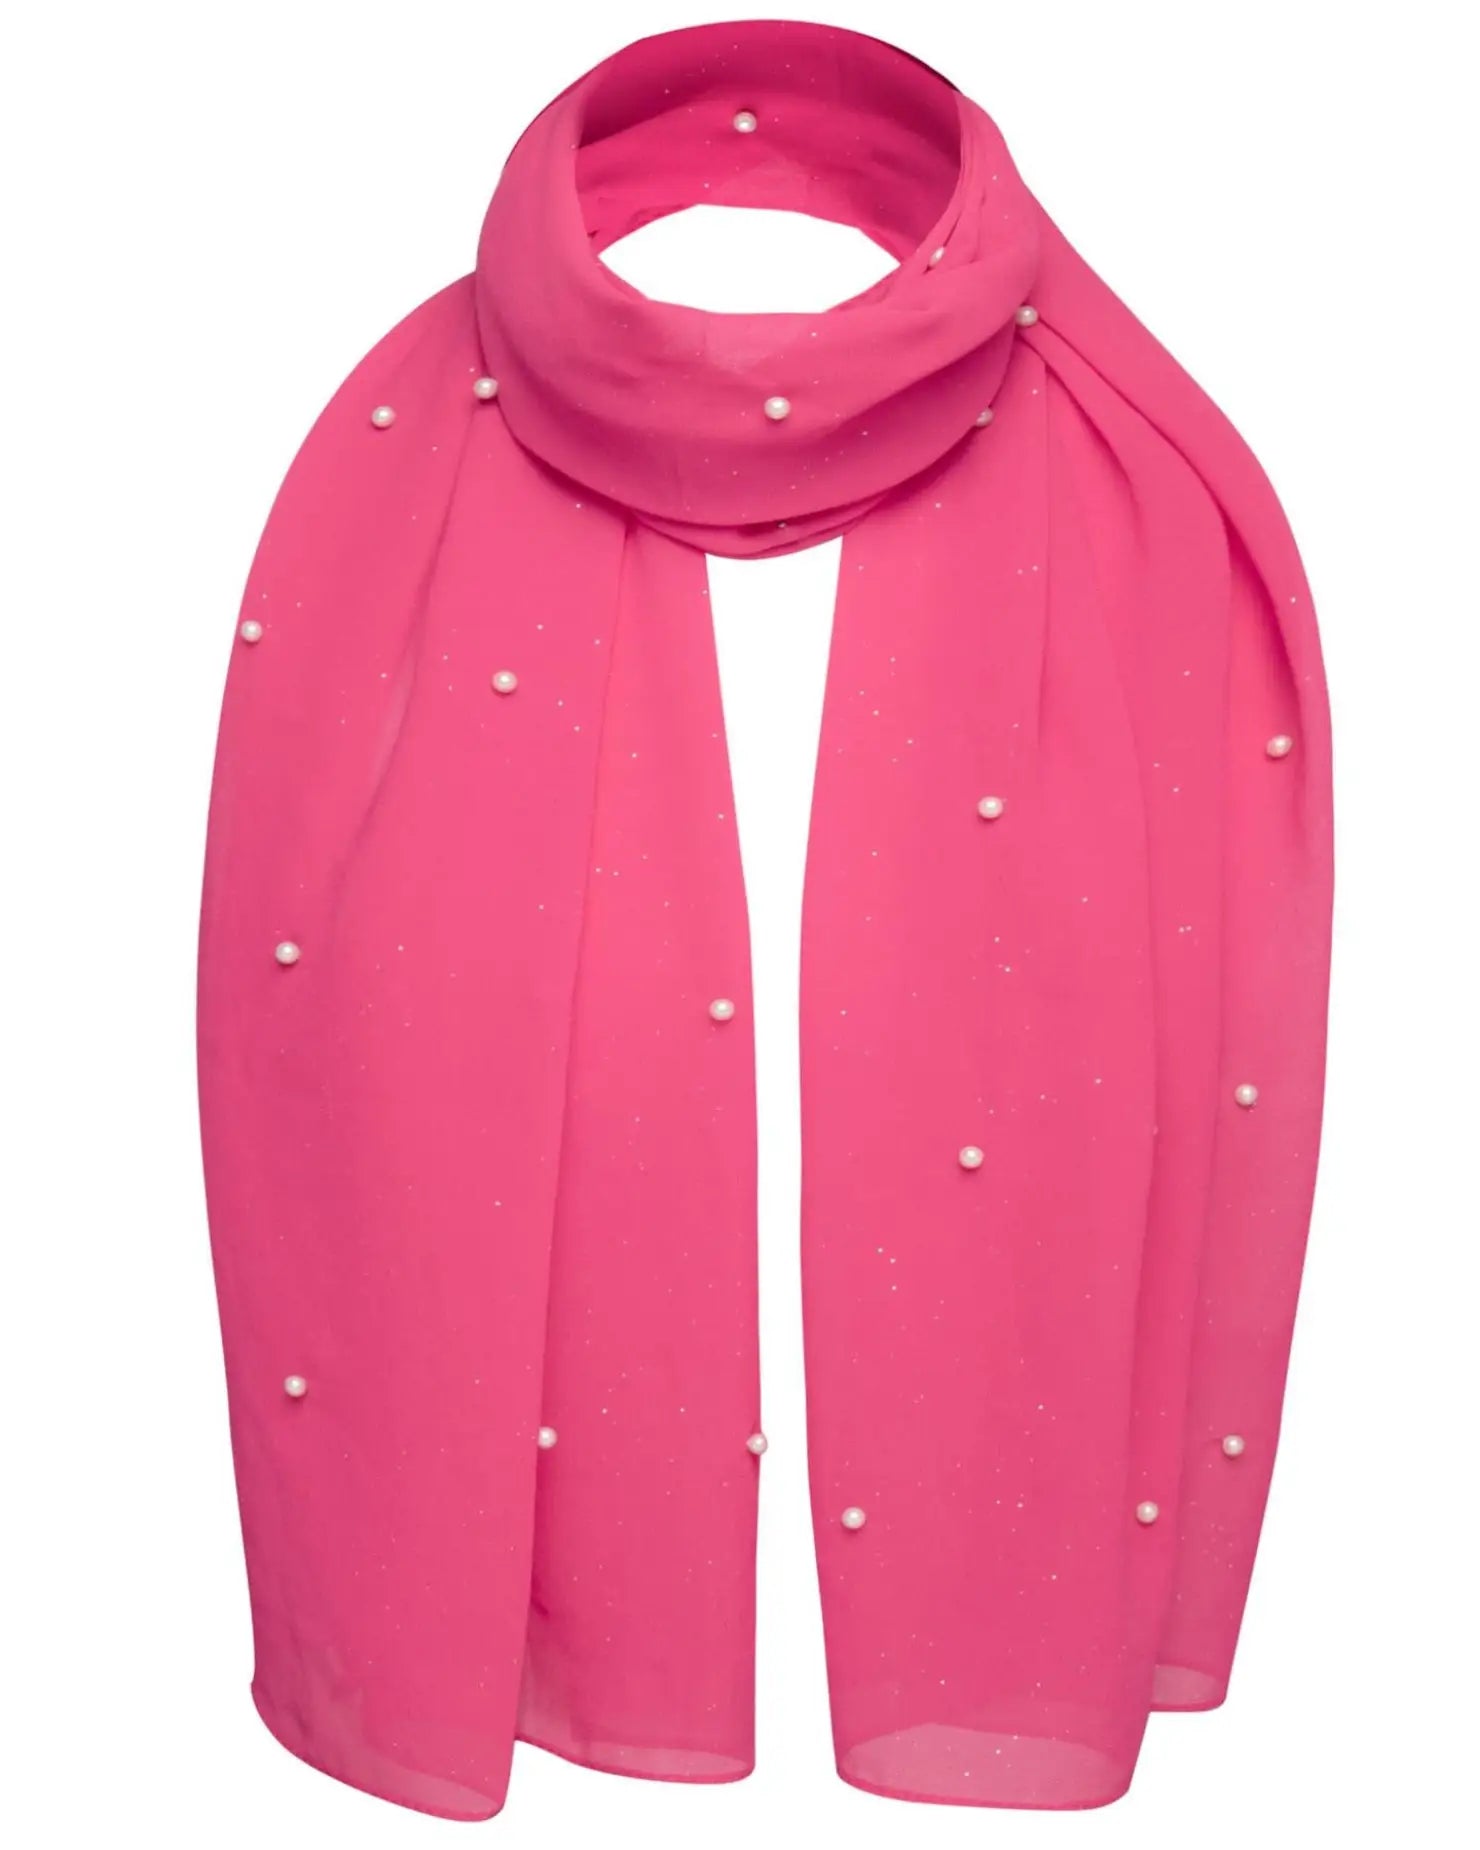 Pink chiffon scarf adorned with pearls.